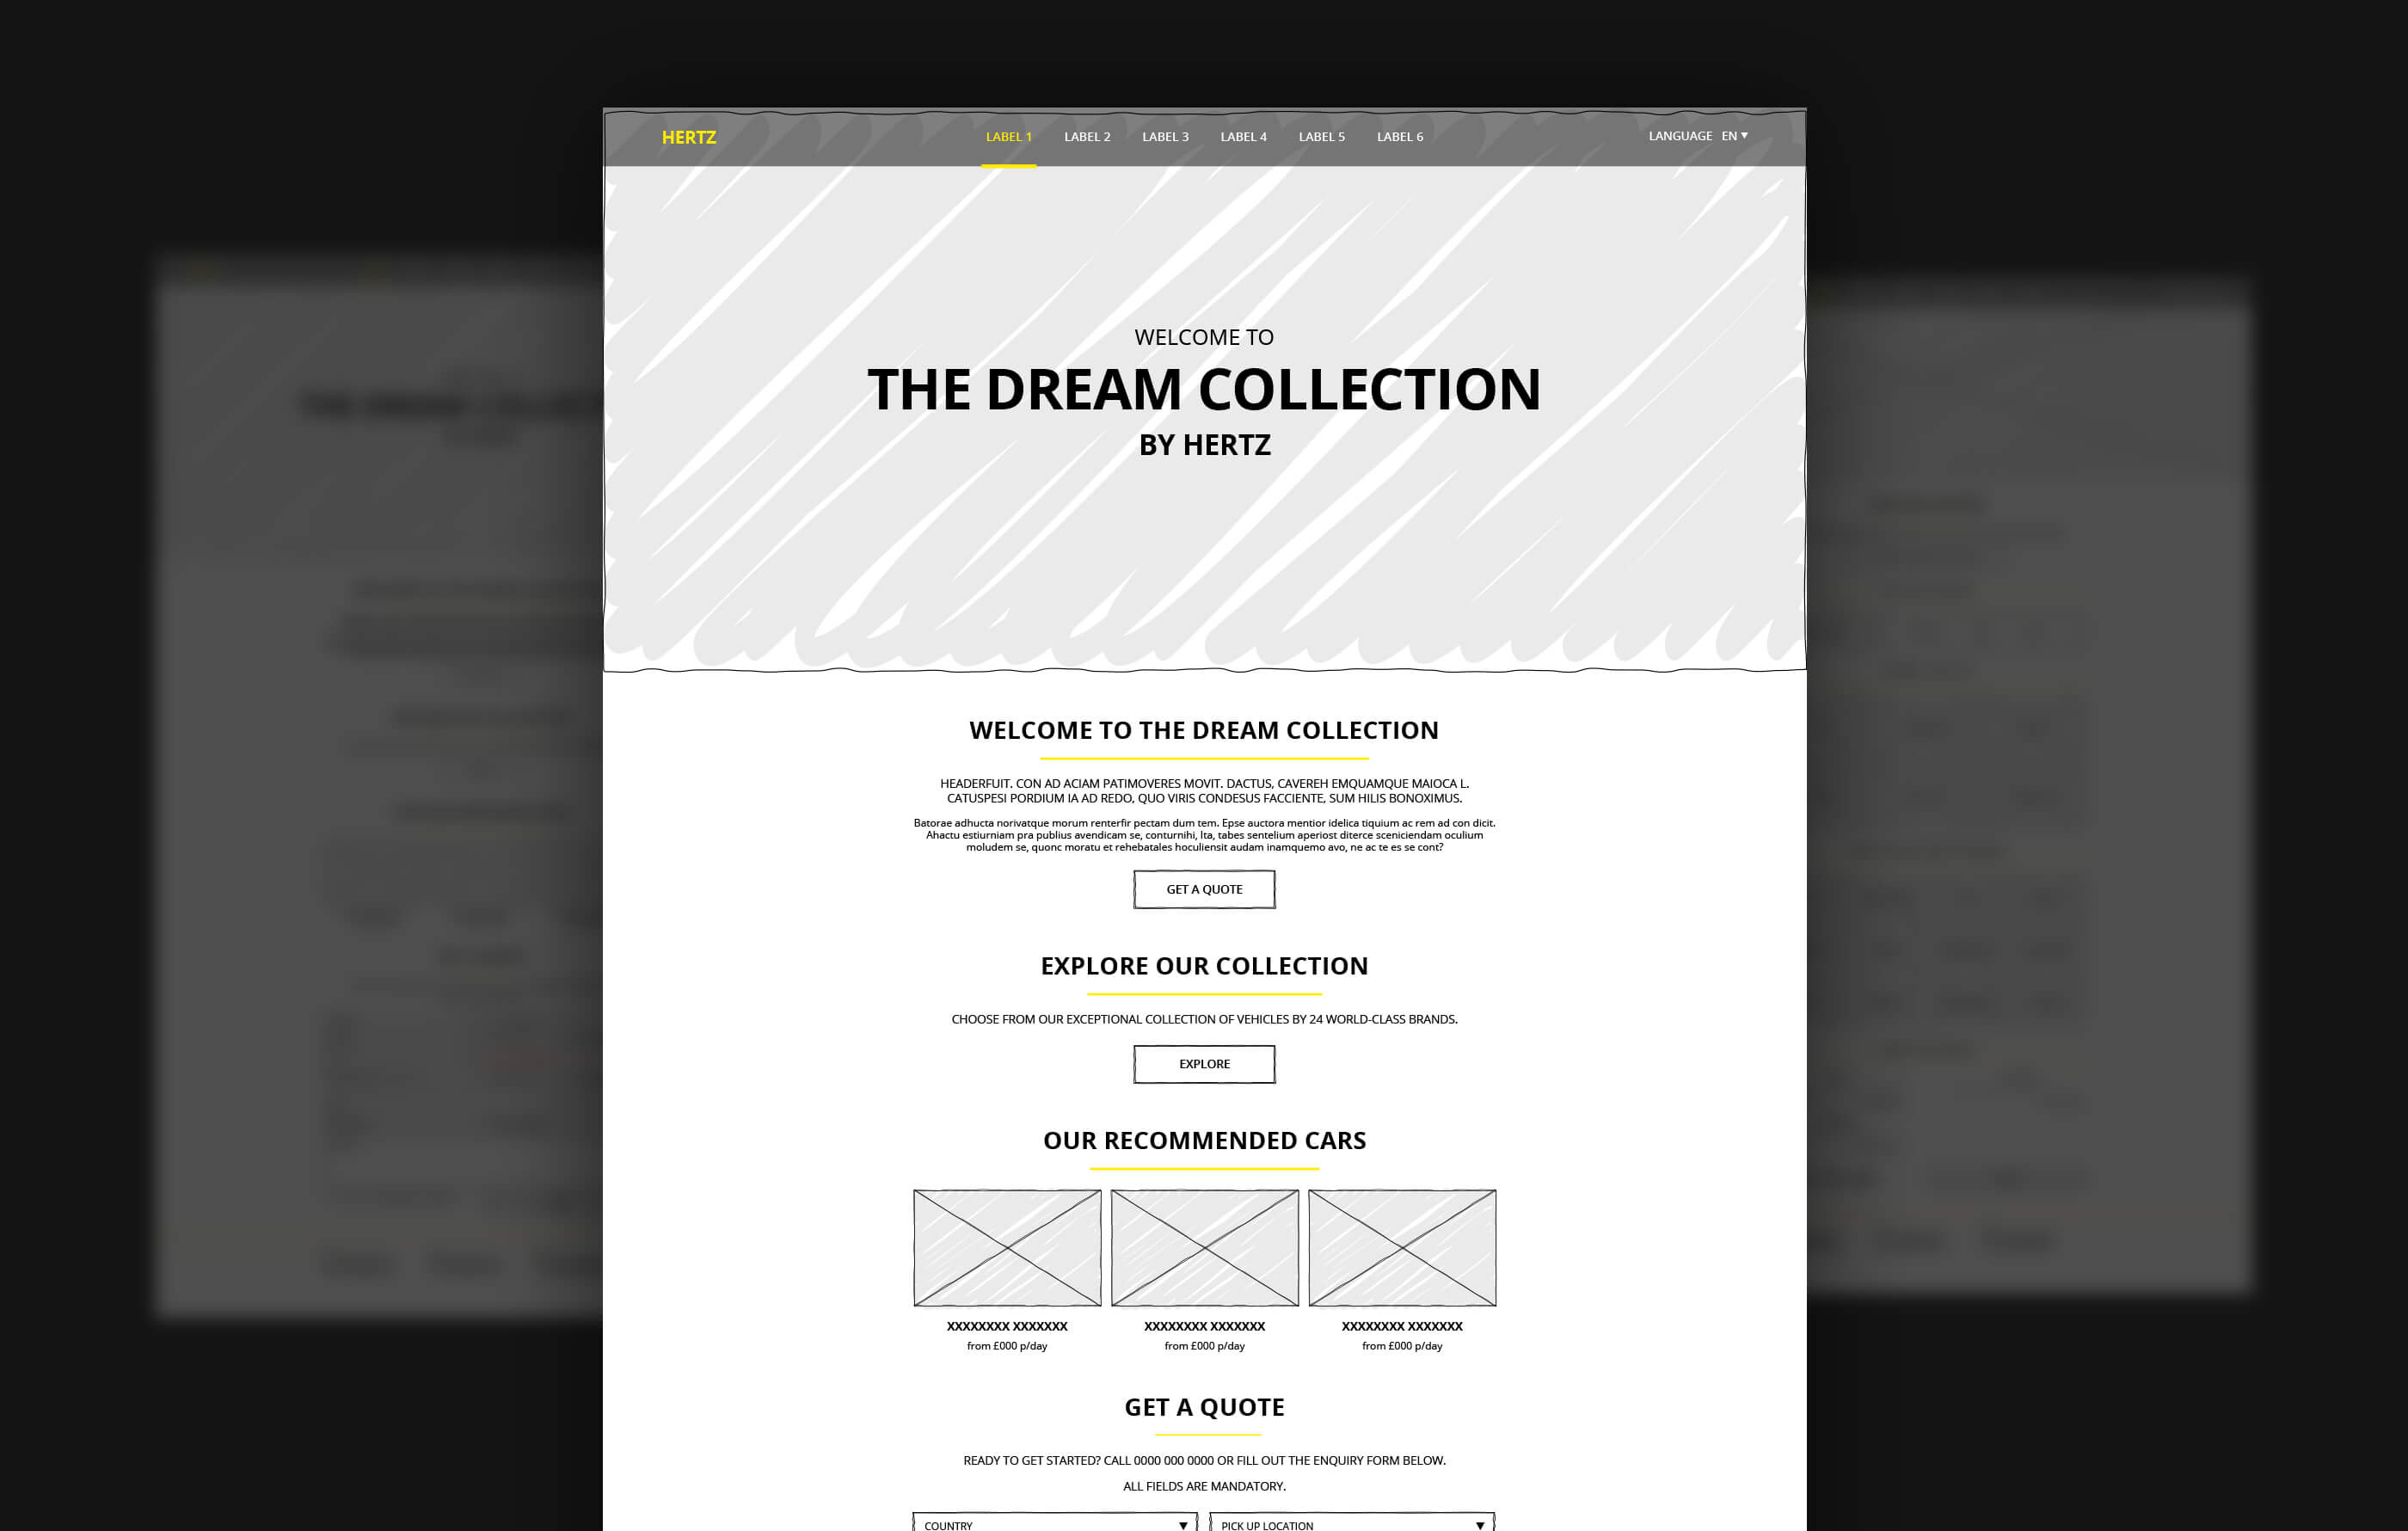 Hand drawn wireframe of the homepage showcasing the collection, in black and white with yellow accents on a black background